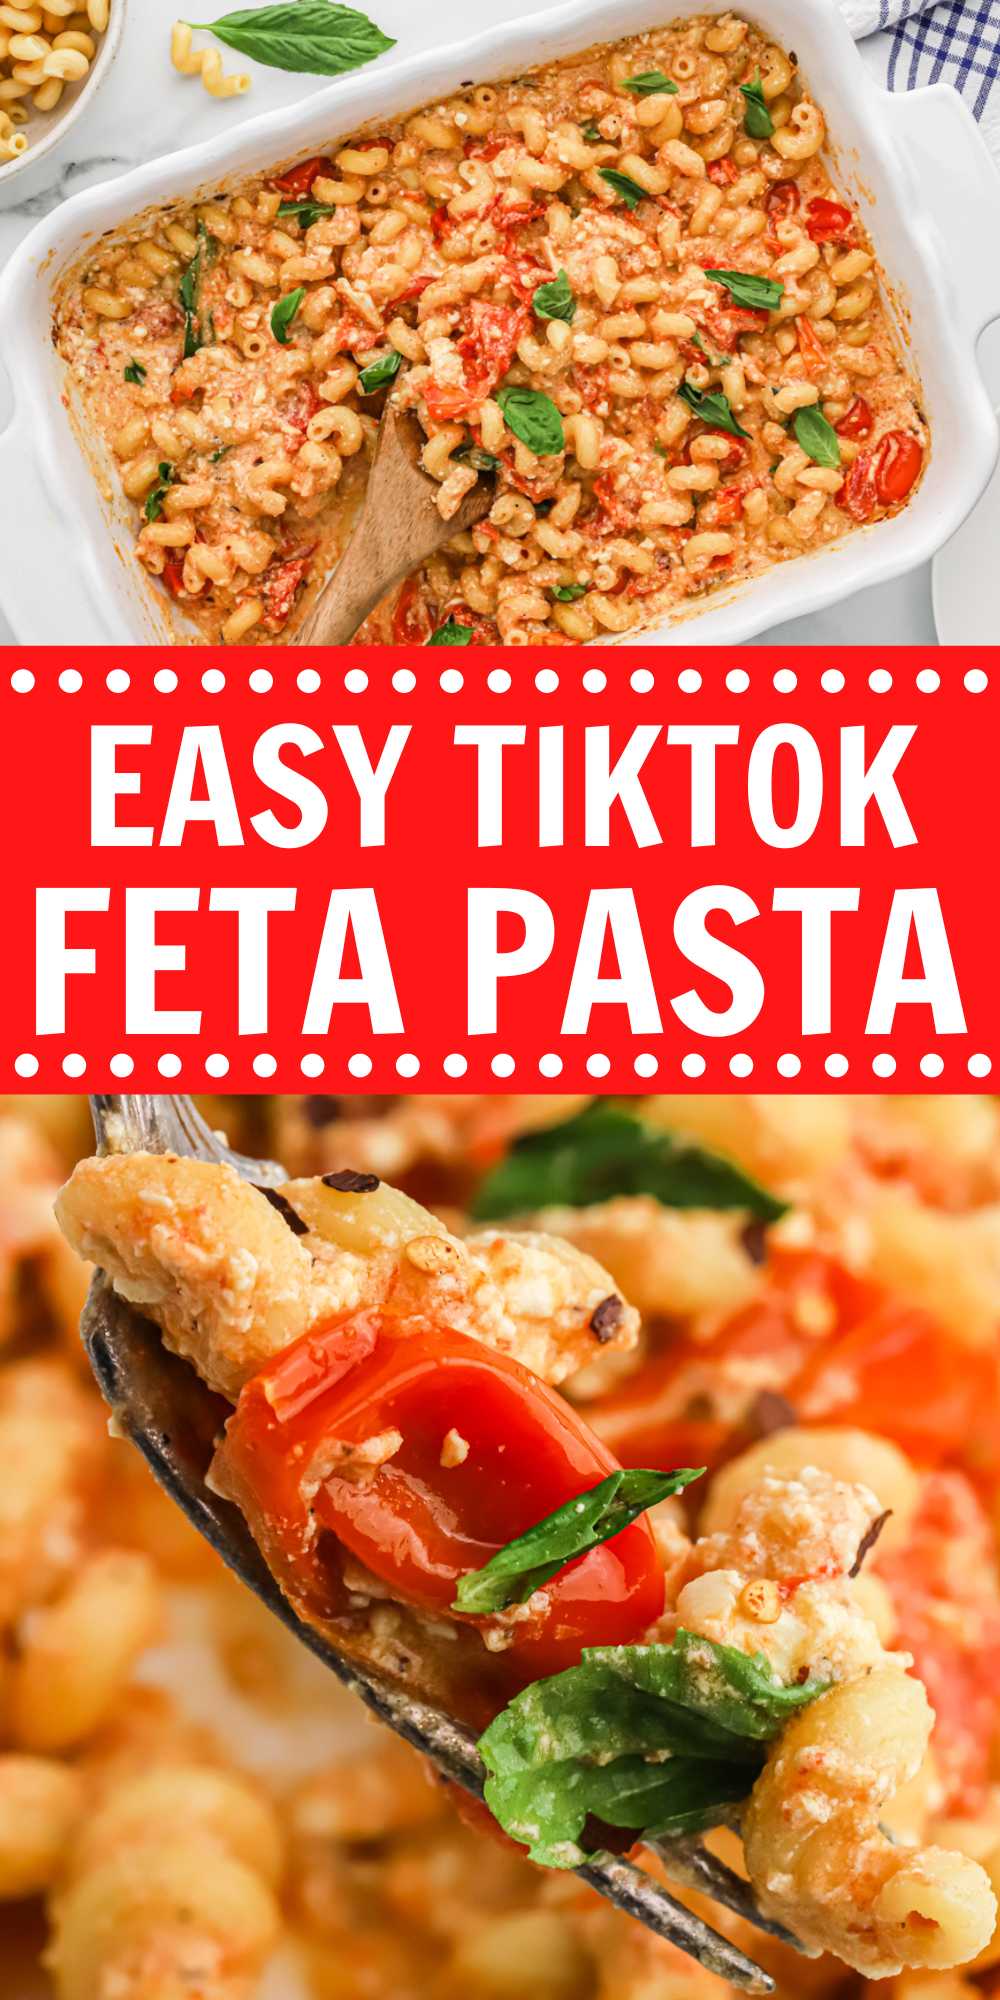 This viral Tiktok Feta Pasta is a delicious and easy recipe to make. Cherry tomatoes, pasta, and cheese are combined to make a creamy recipe. This simple baked feta pastas dish is now become a family favorite. The dish comes out creamy and full of flavor. #eatingonadime #tiktokfetapasta #viralfetapastarecipe